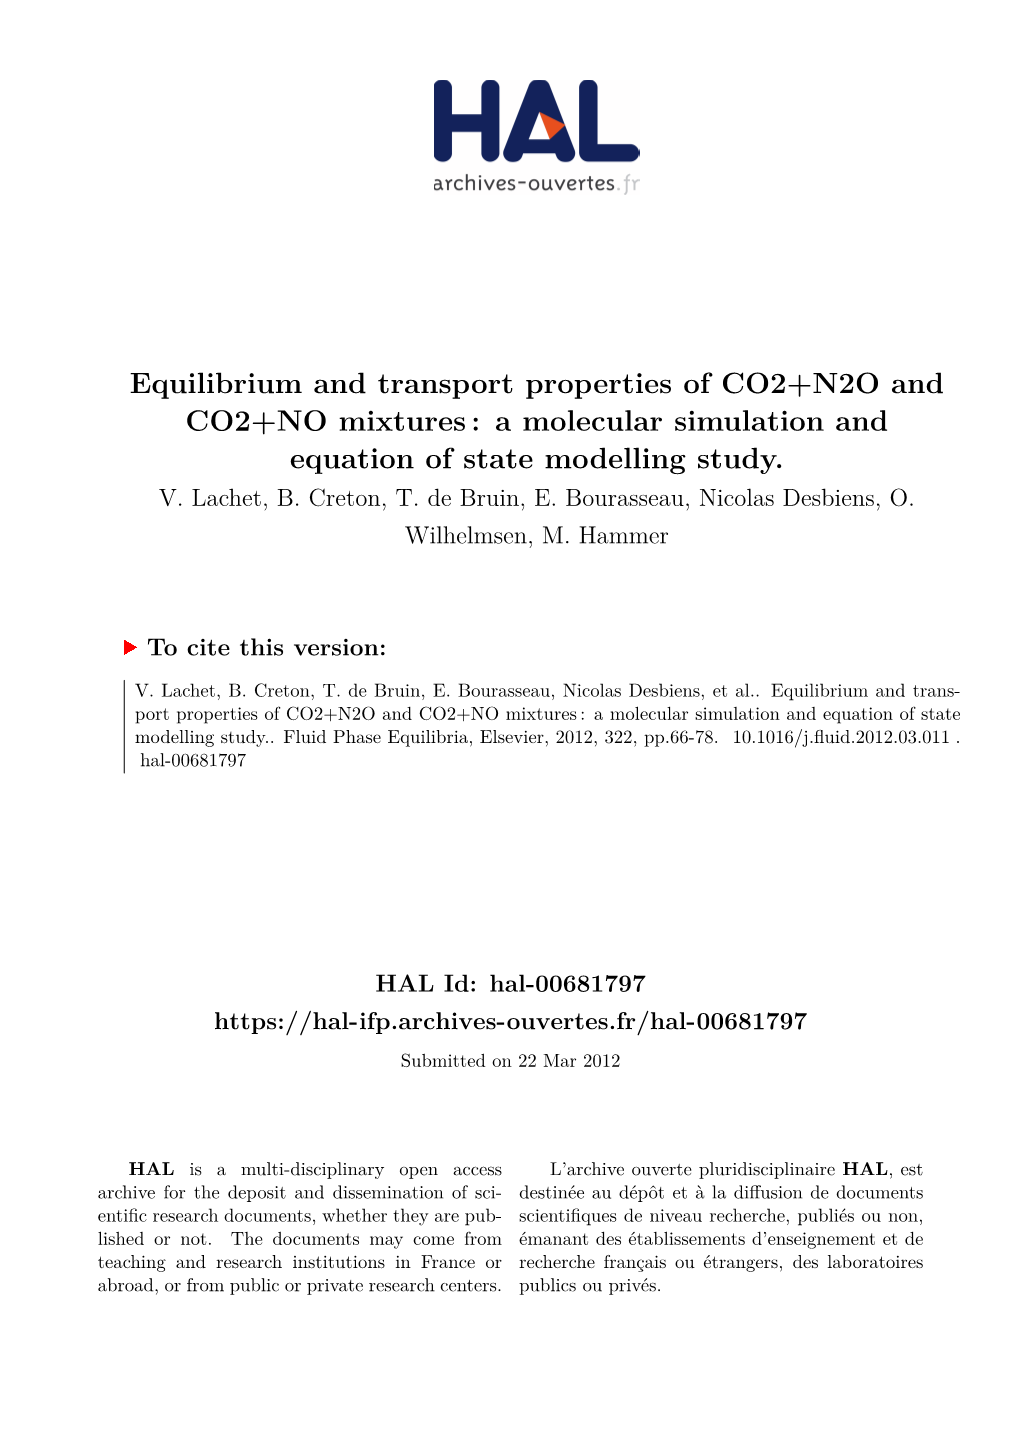 Equilibrium and Transport Properties of CO2+N2O and CO2+NO Mixtures : a Molecular Simulation and Equation of State Modelling Study